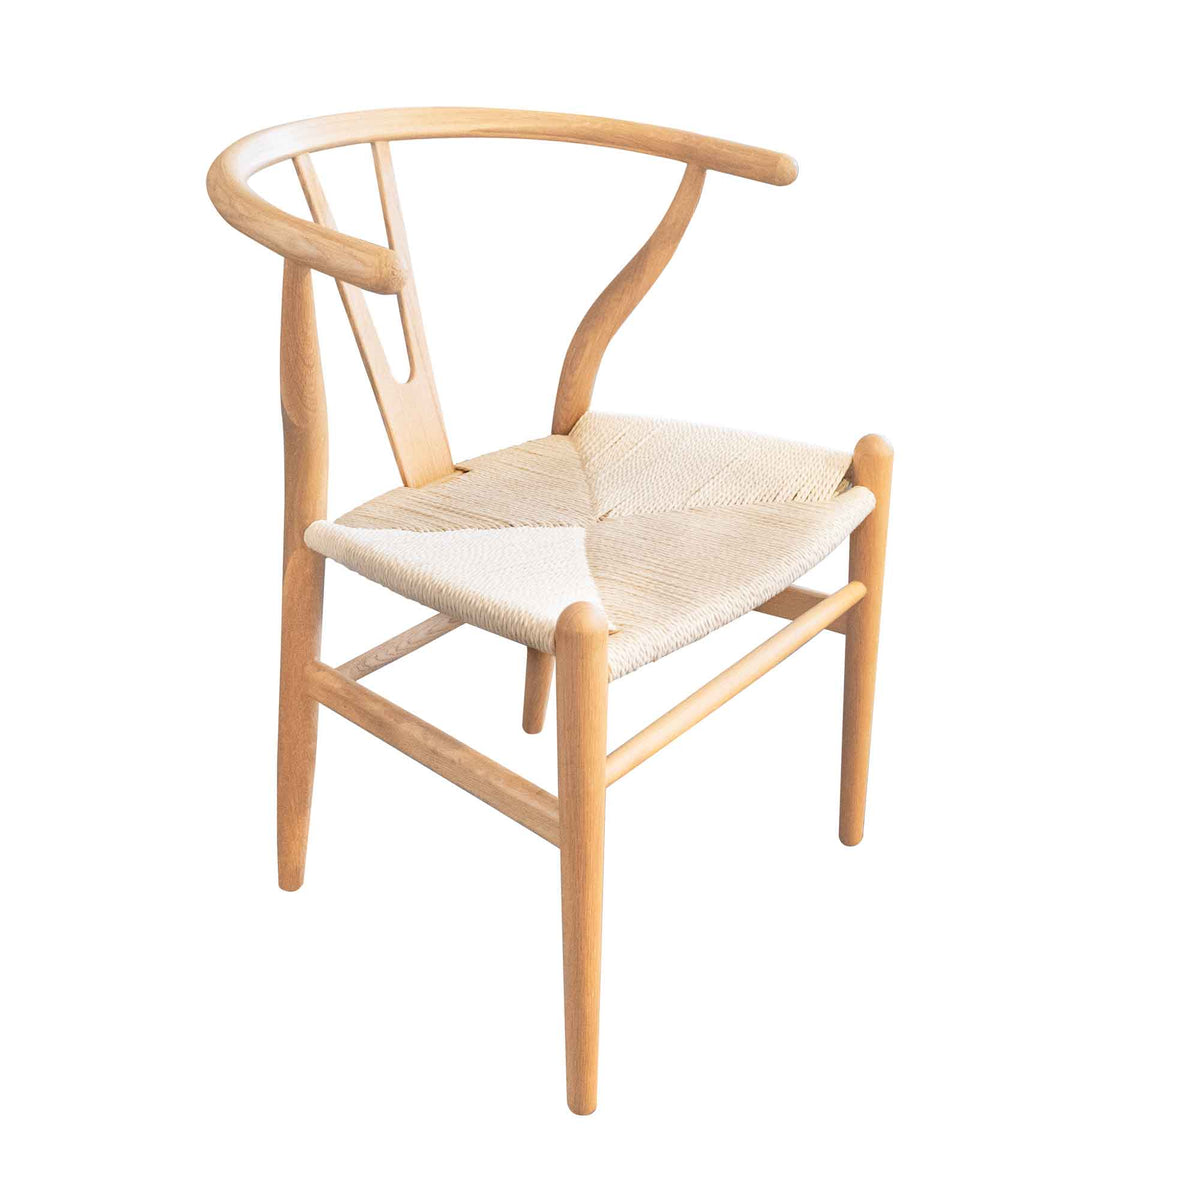 Wishbone Beech Dining Chair PRE ORDER (Restocking in August)